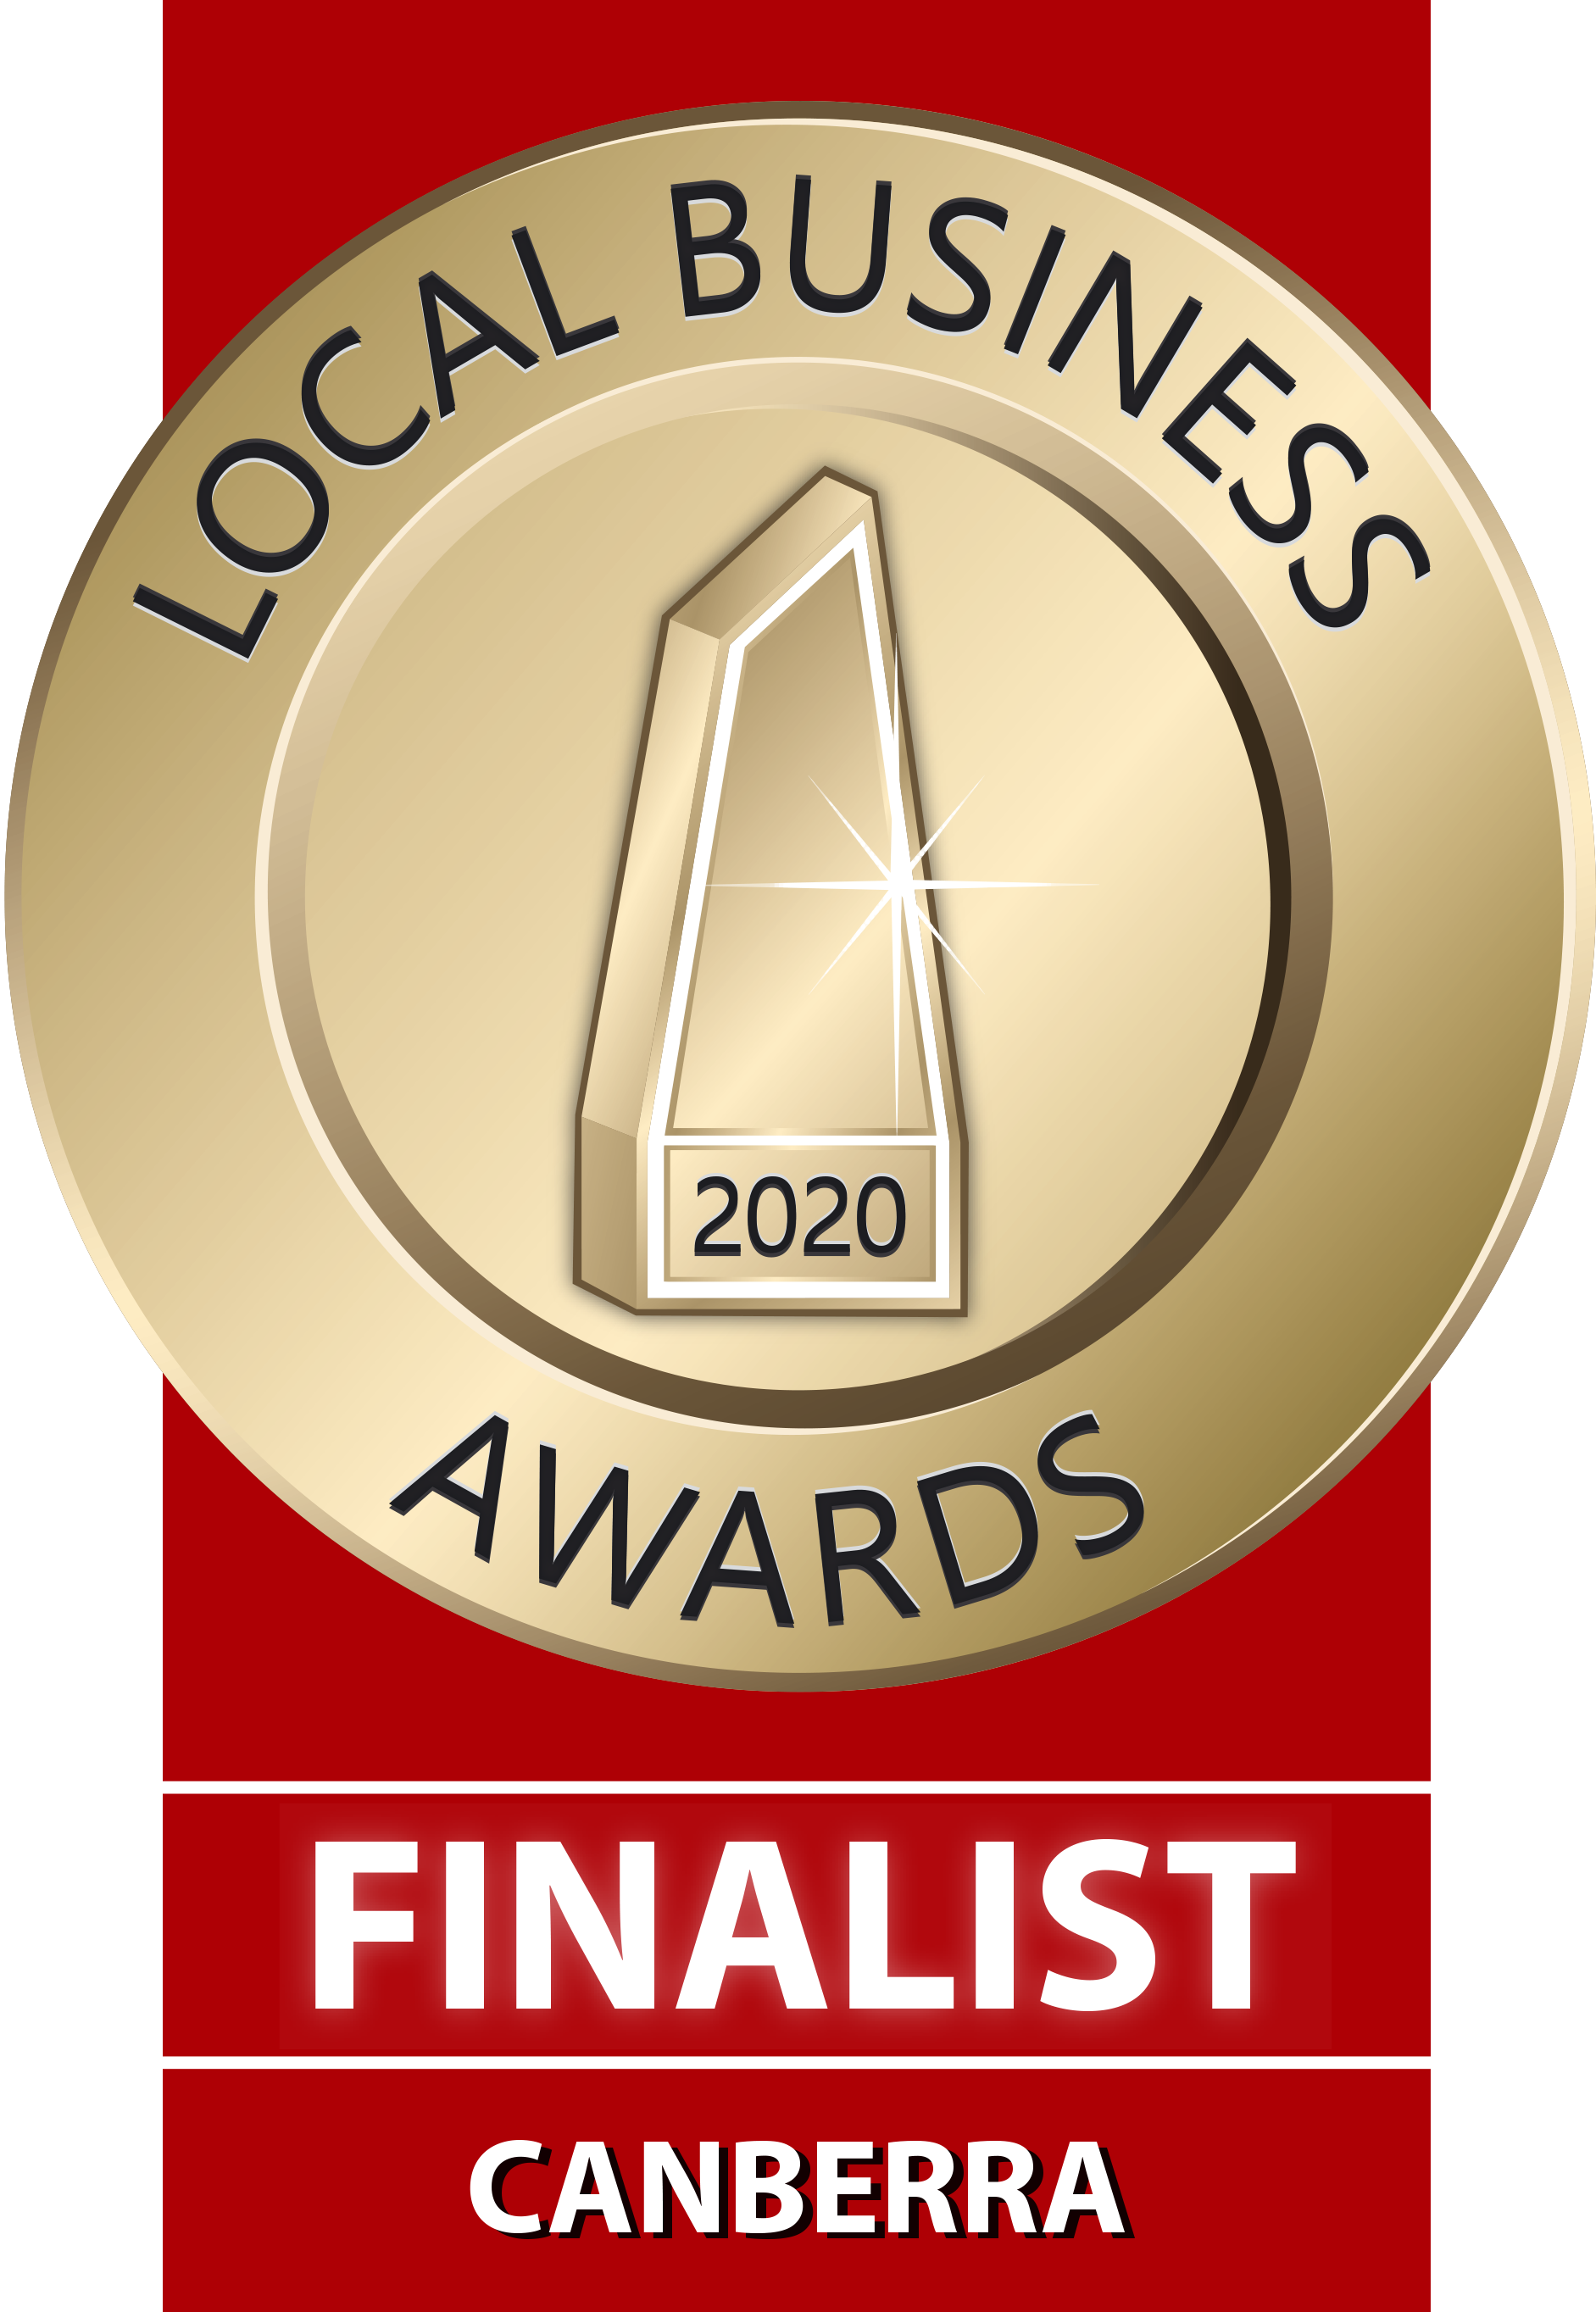 Civic Gentle Dental Care is a finalist in Canberra Local Business Awards